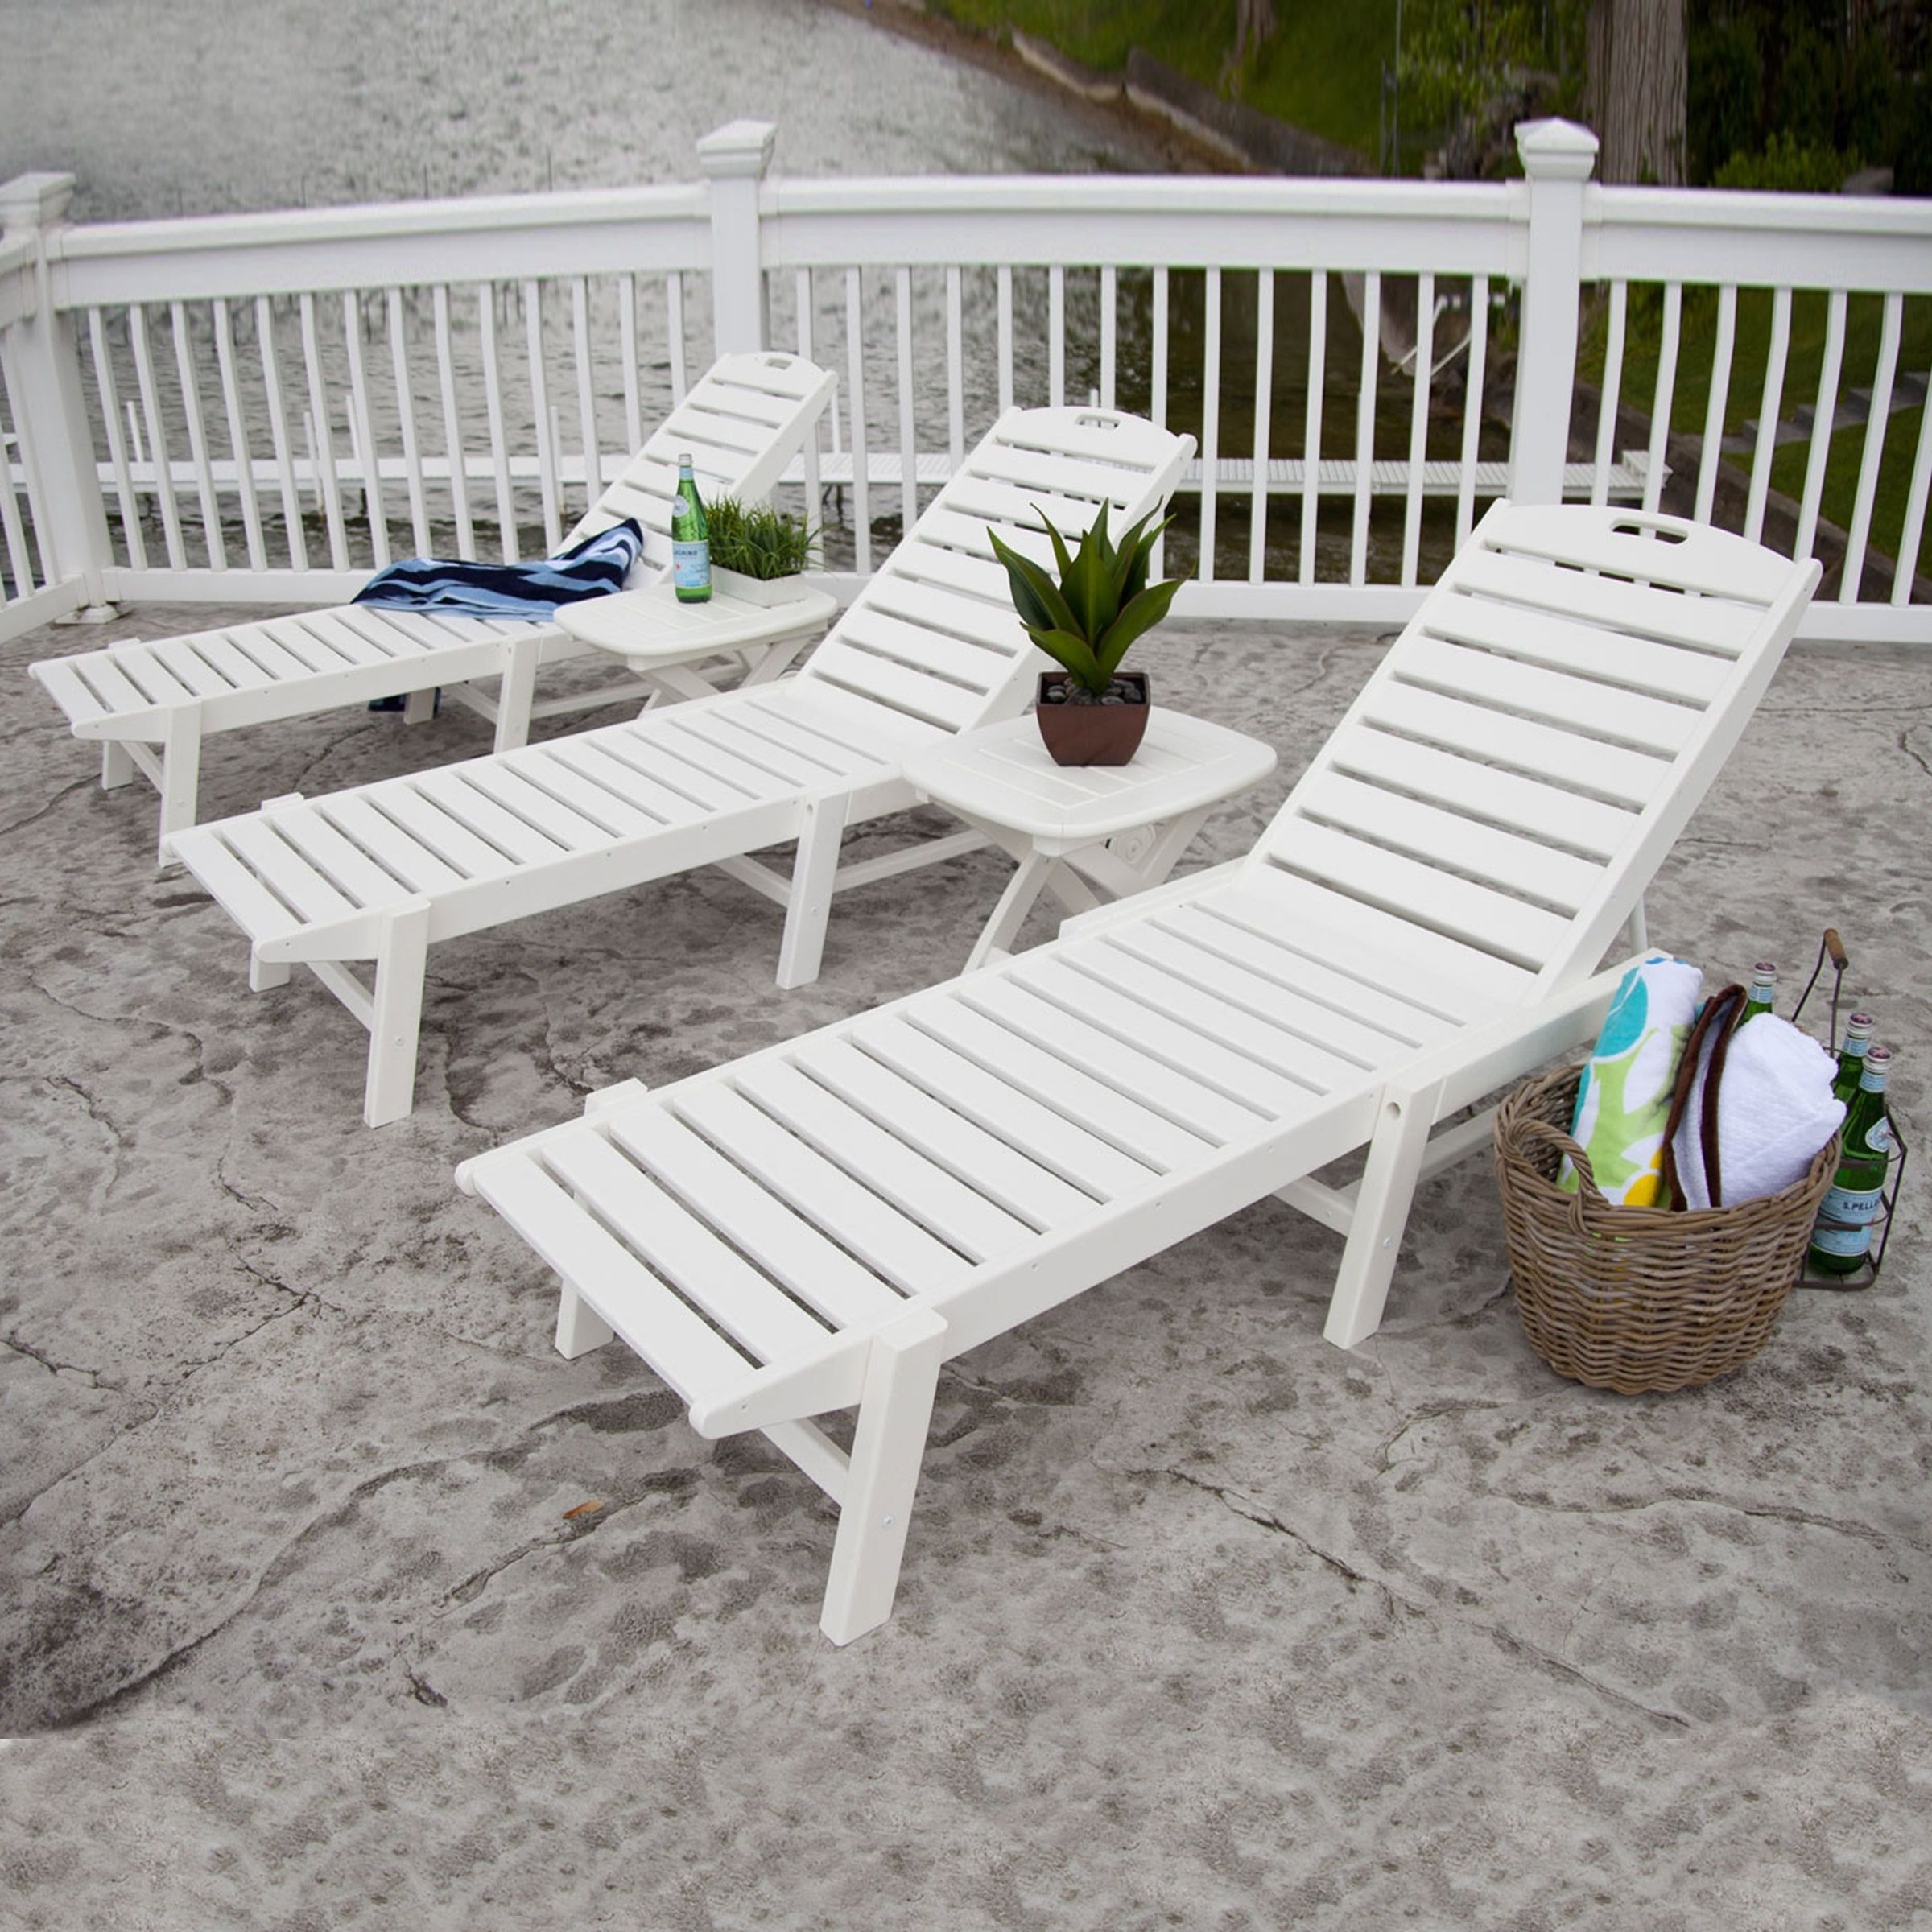 Popular Hotel Chaise Lounge Chairs Regarding Polywood Nautical Wheeled Chaise Lounge Set (View 11 of 15)